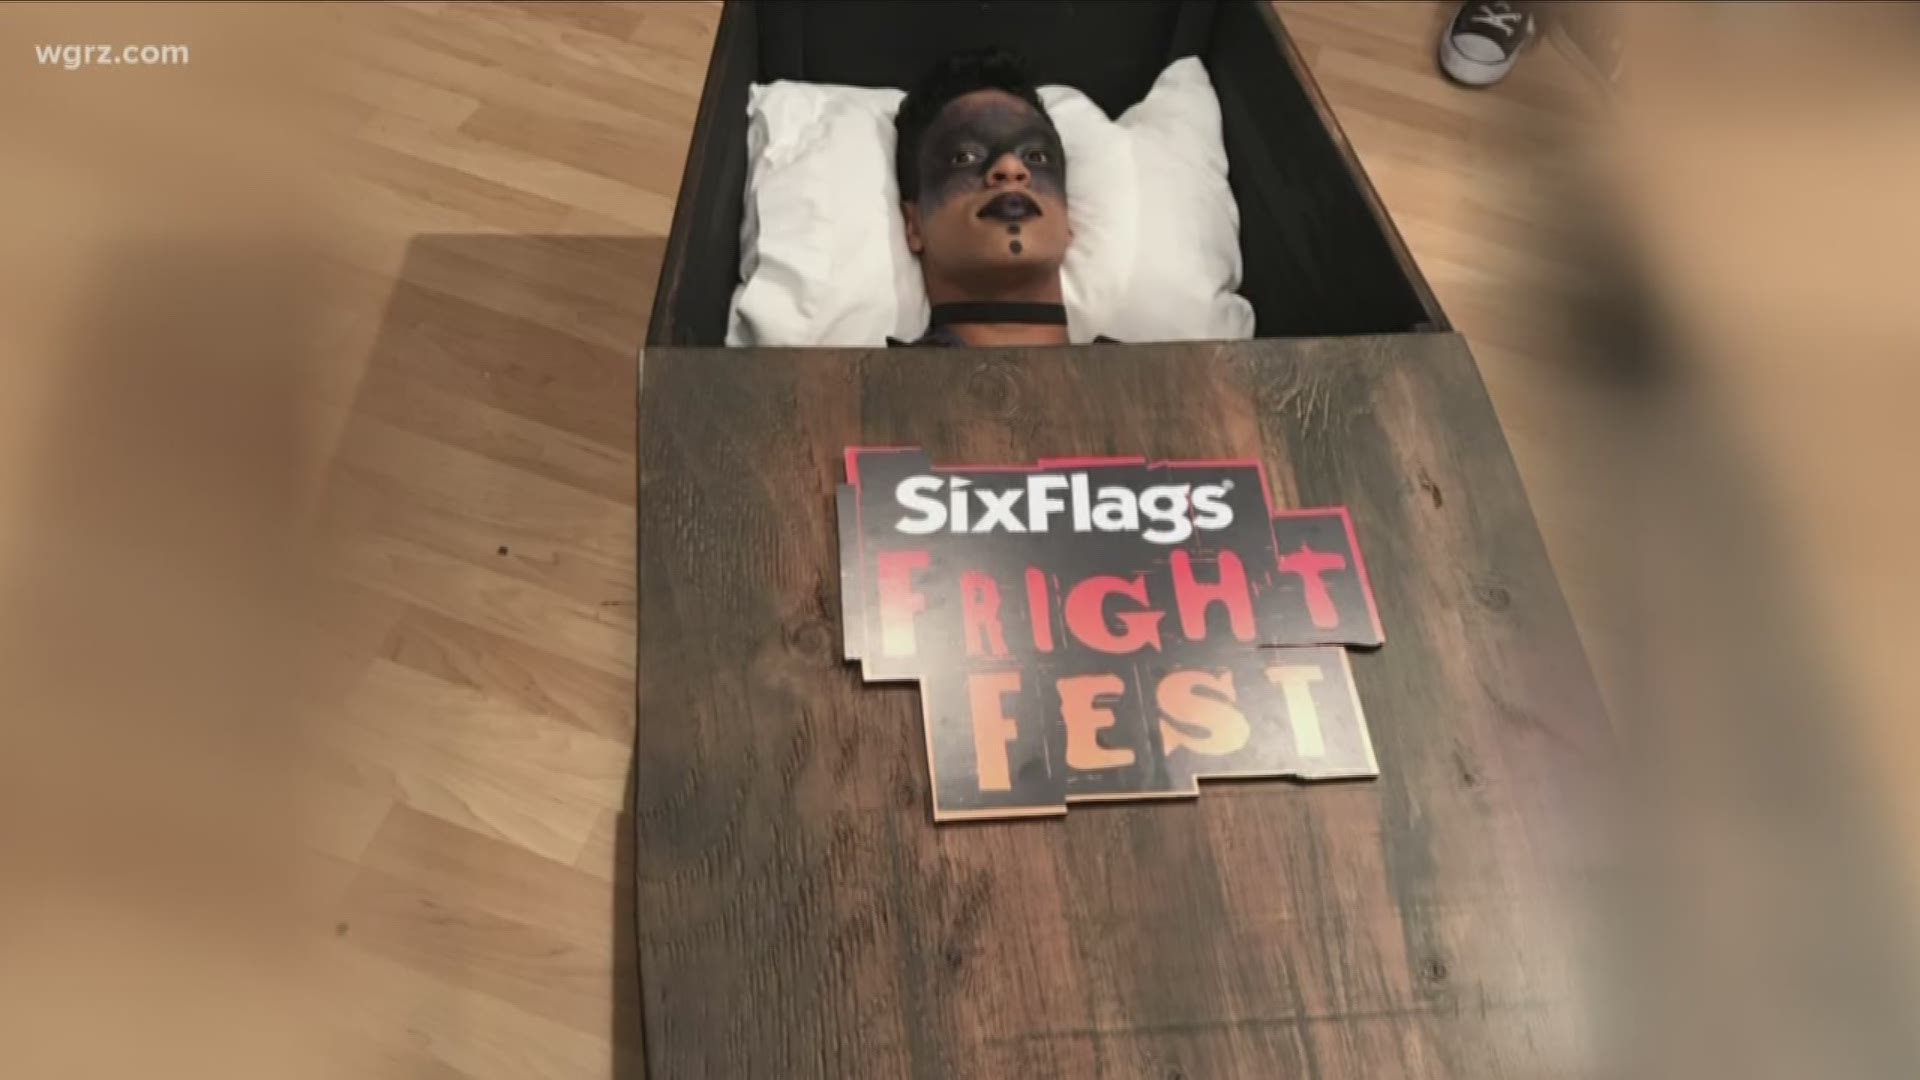 Darien Lake to offer 30-hour coffin challenge | 0